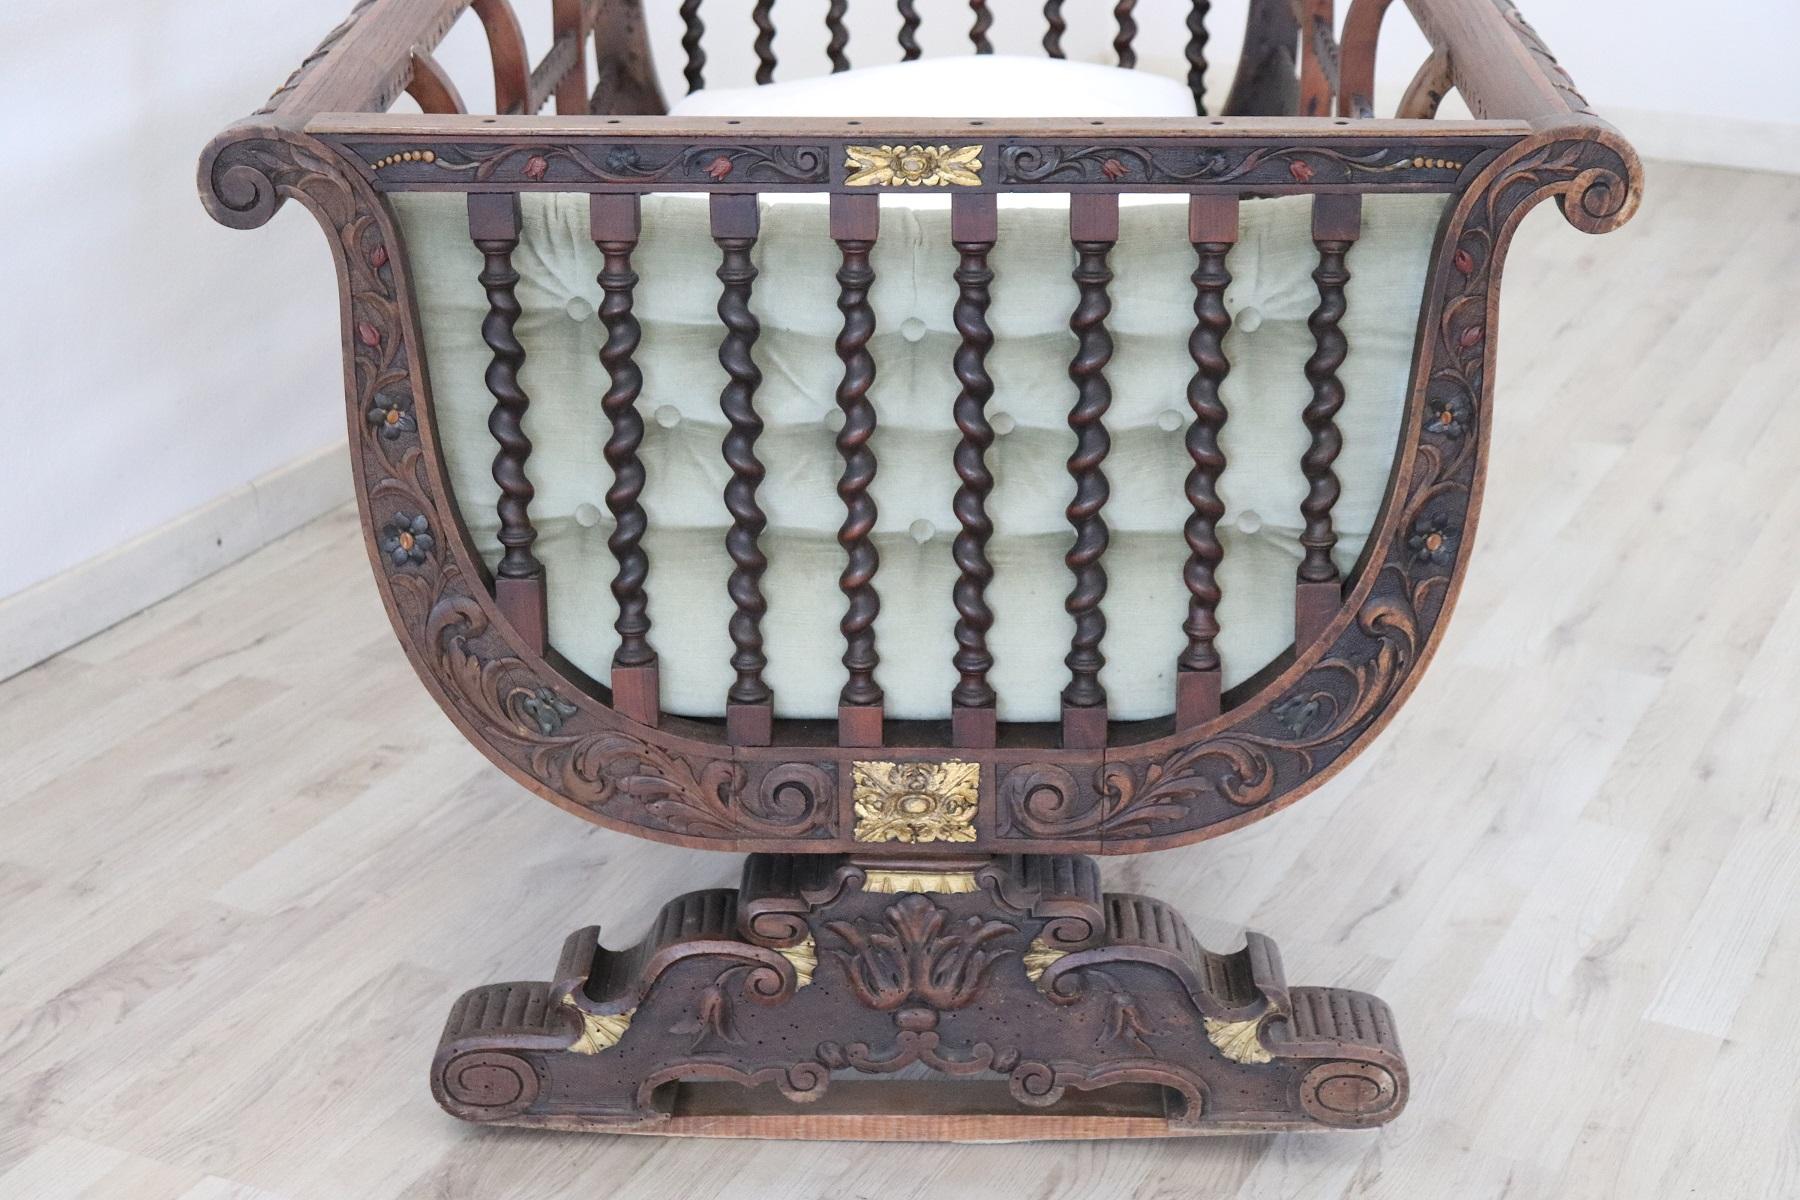 Rare antique crib for children or cot 1880s. Made of solid walnut wood with refined workmanship. Walnut wood has turned columns along each side of the cradle. On the edges refined decorations with carving of floral taste. Some decorations are